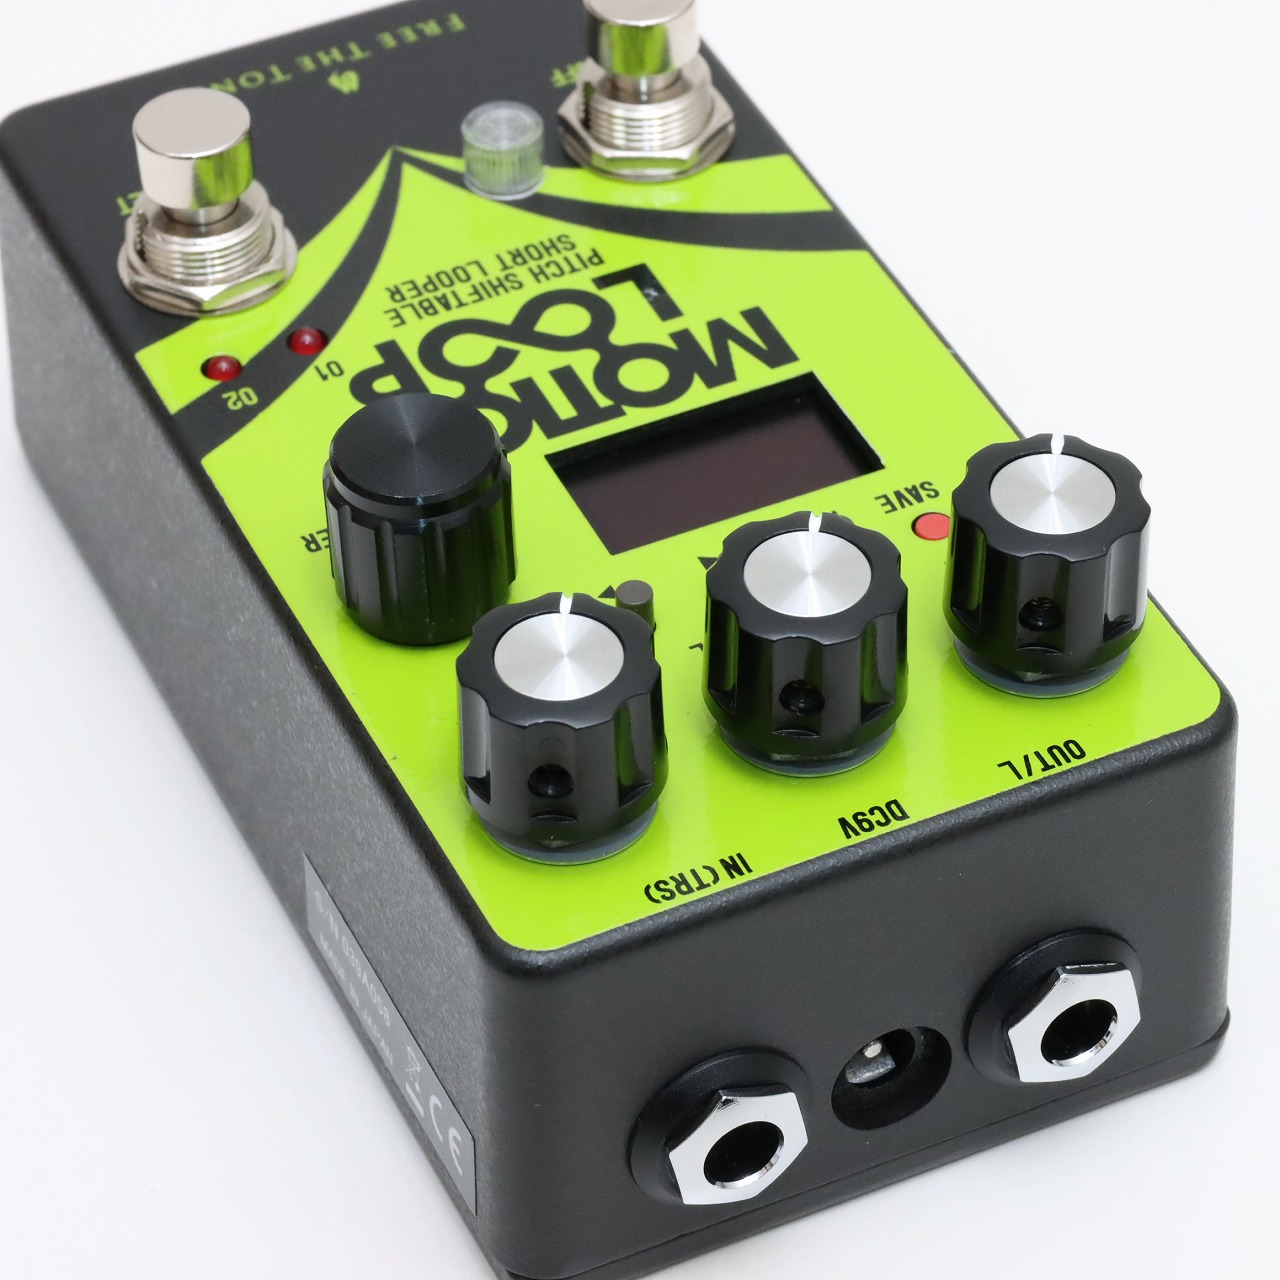 FREE THE TONE MOTION LOOP / ML-1L PITCH SHIFTABLE SHORT LOOPER